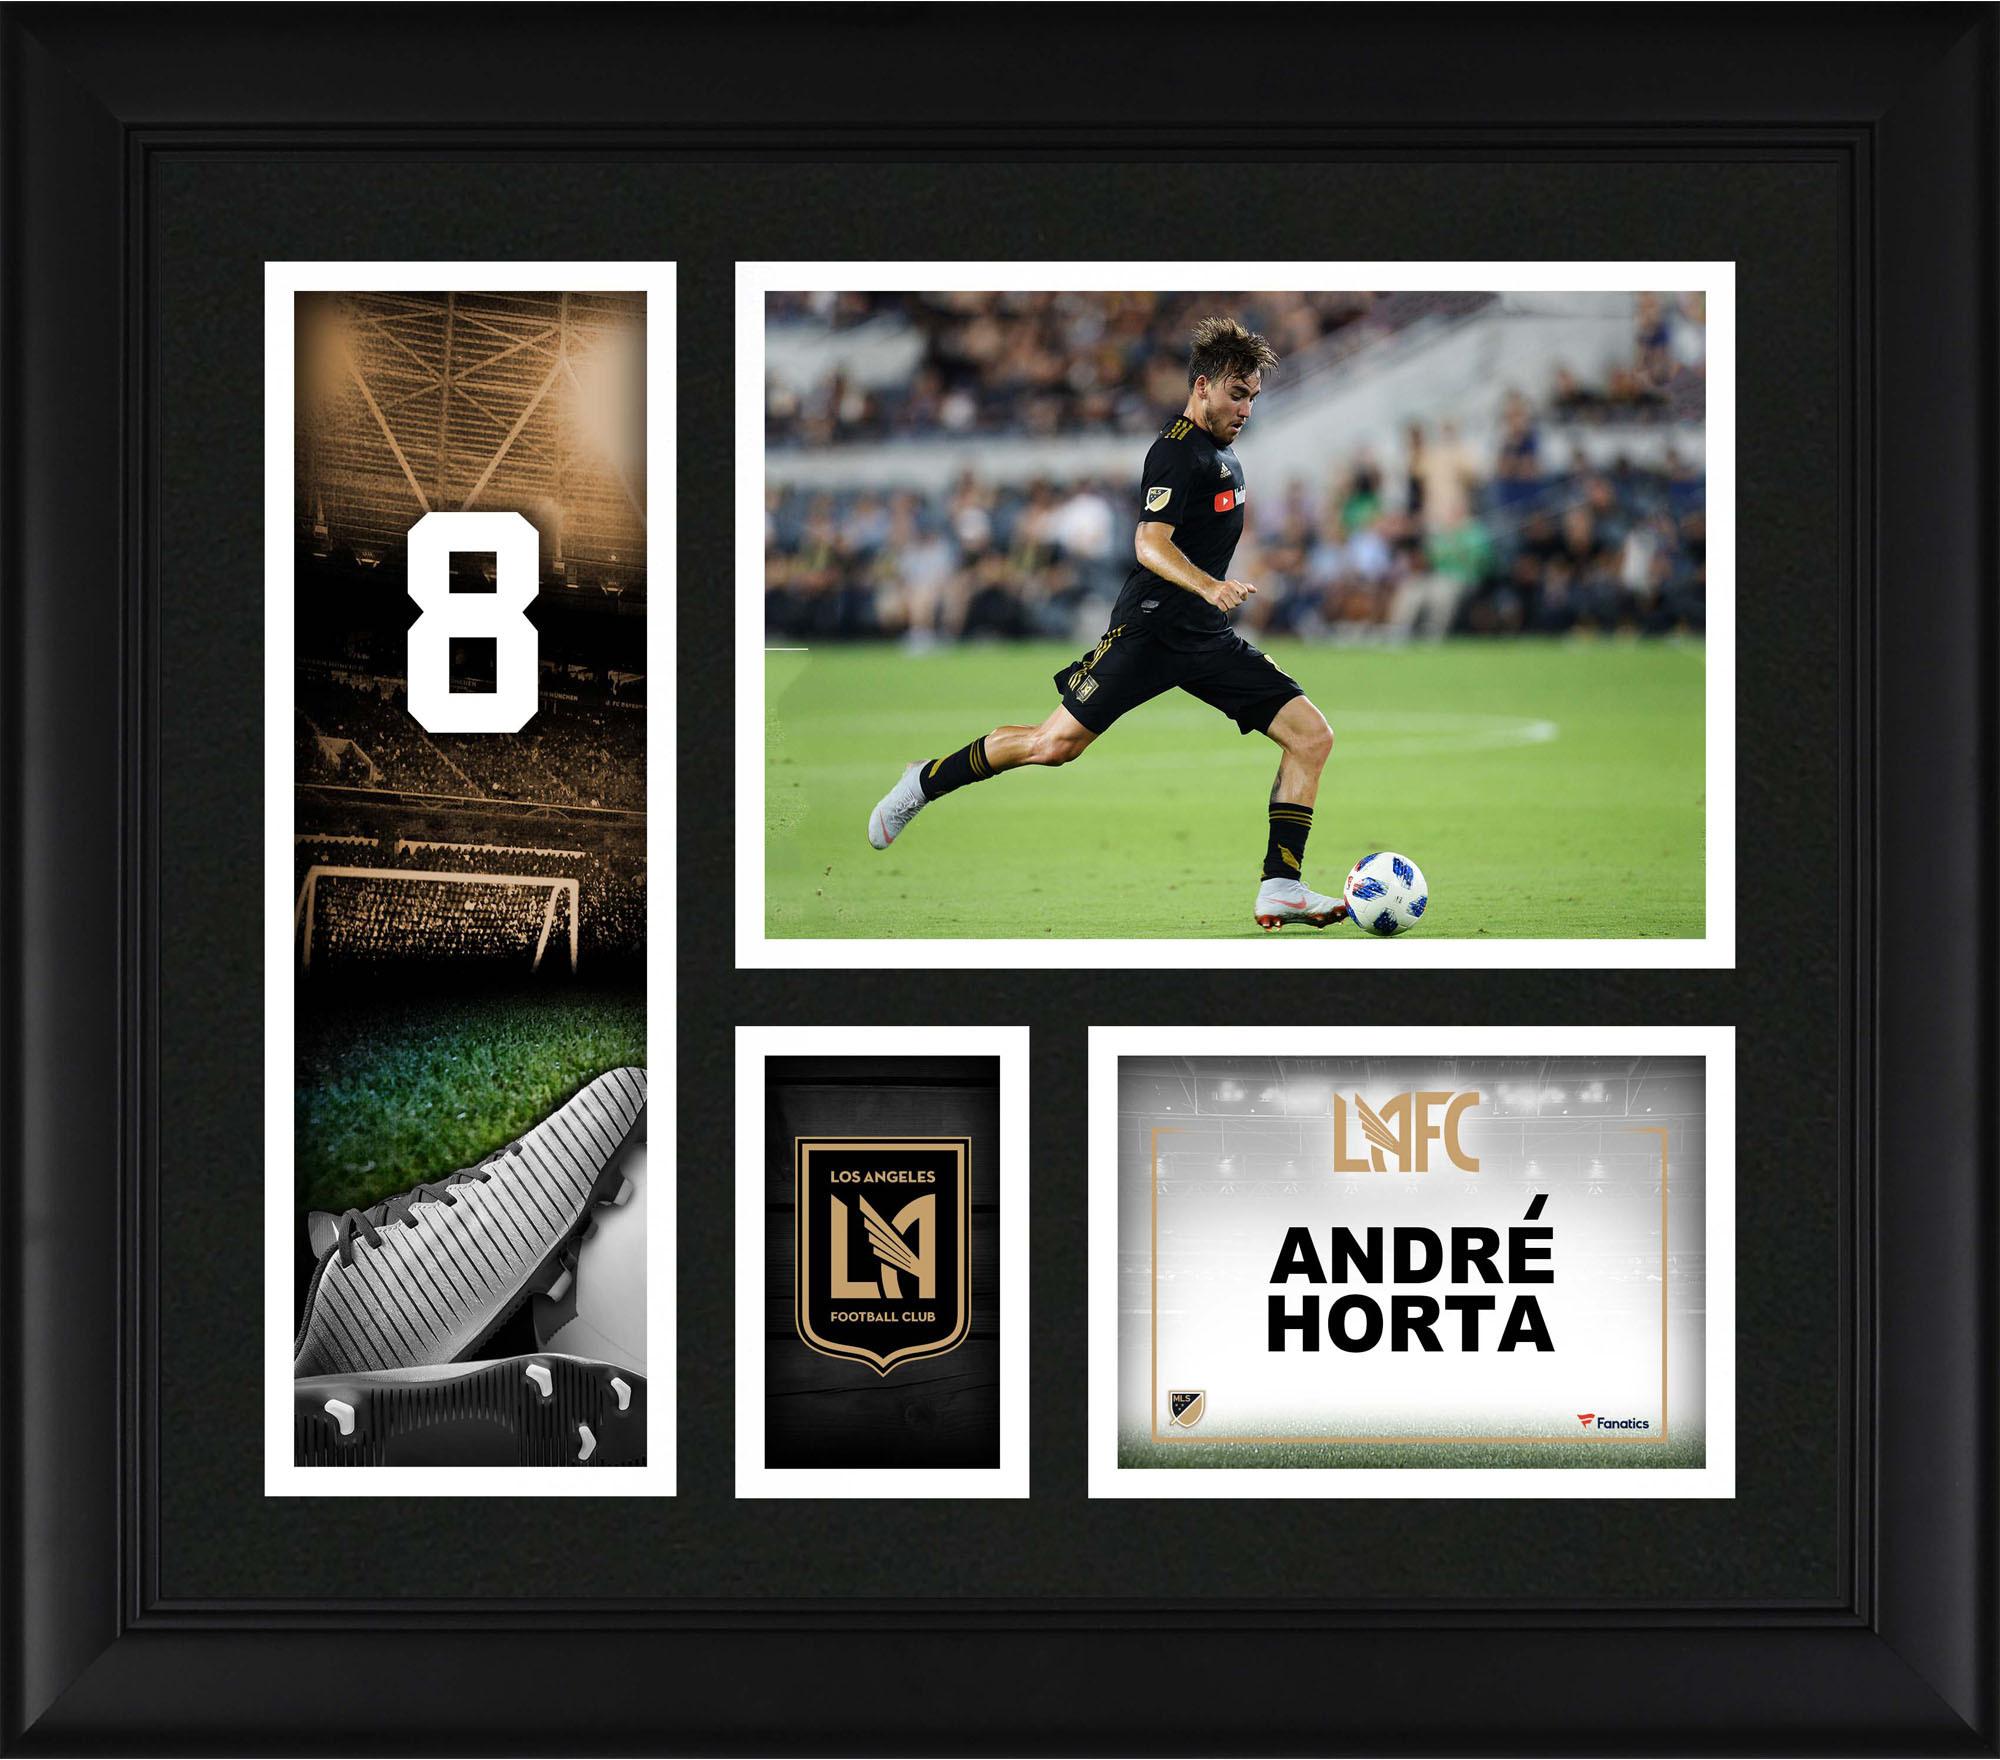 Andr Horta LAFC Framed 15'' x 17'' Player Collage